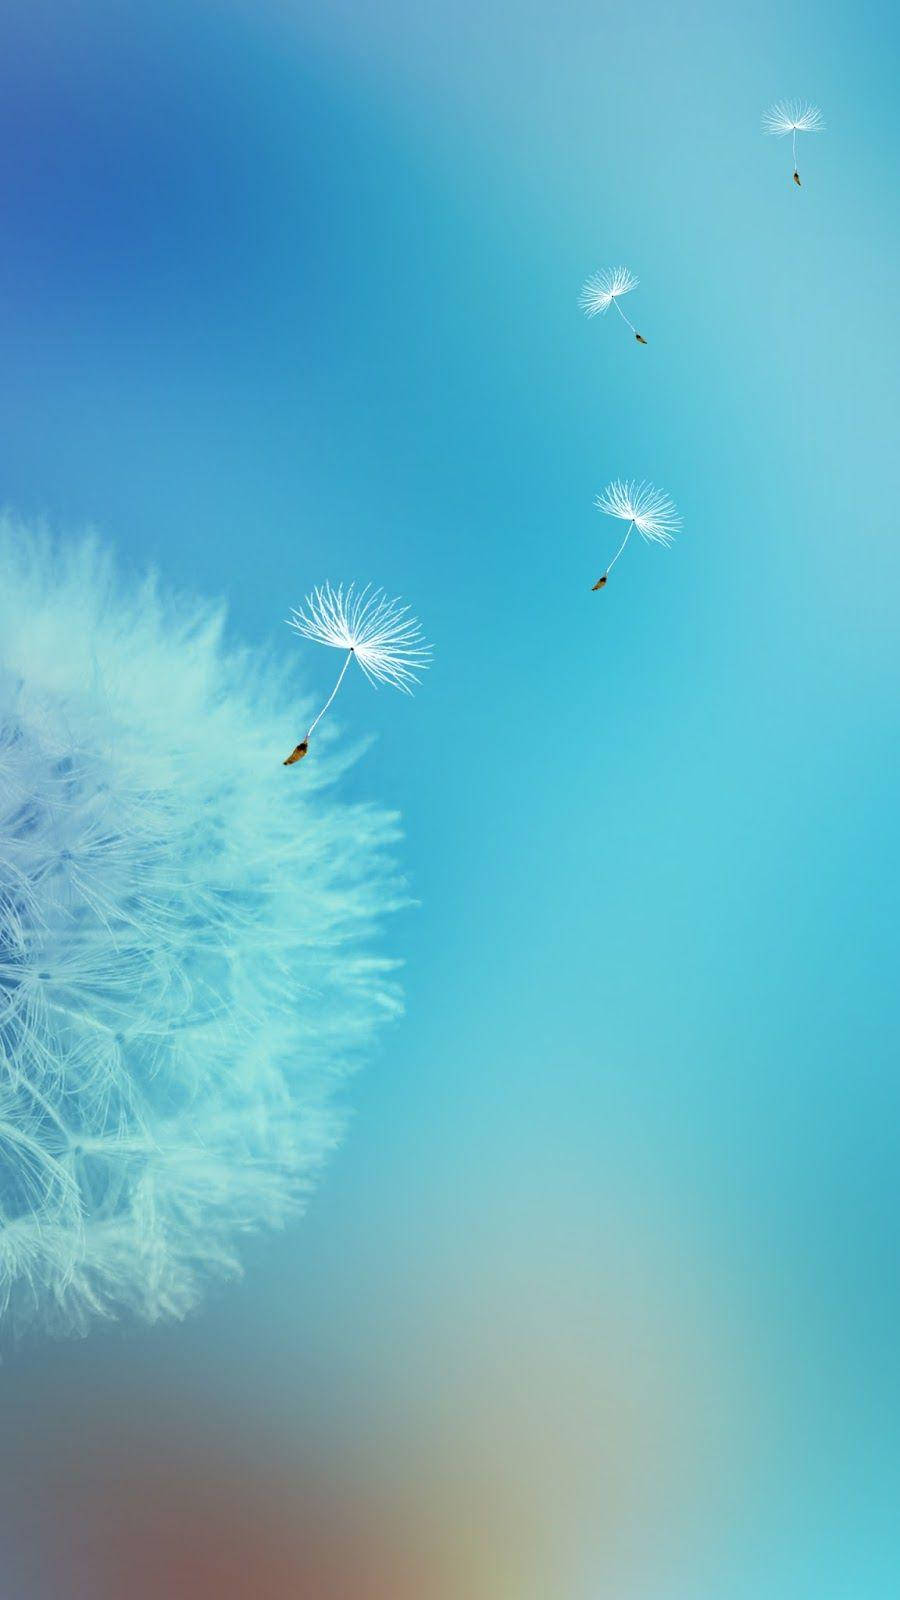 A Beautiful Dandelion Wallpapers On Samsung Galaxy S7 Edge Display Background